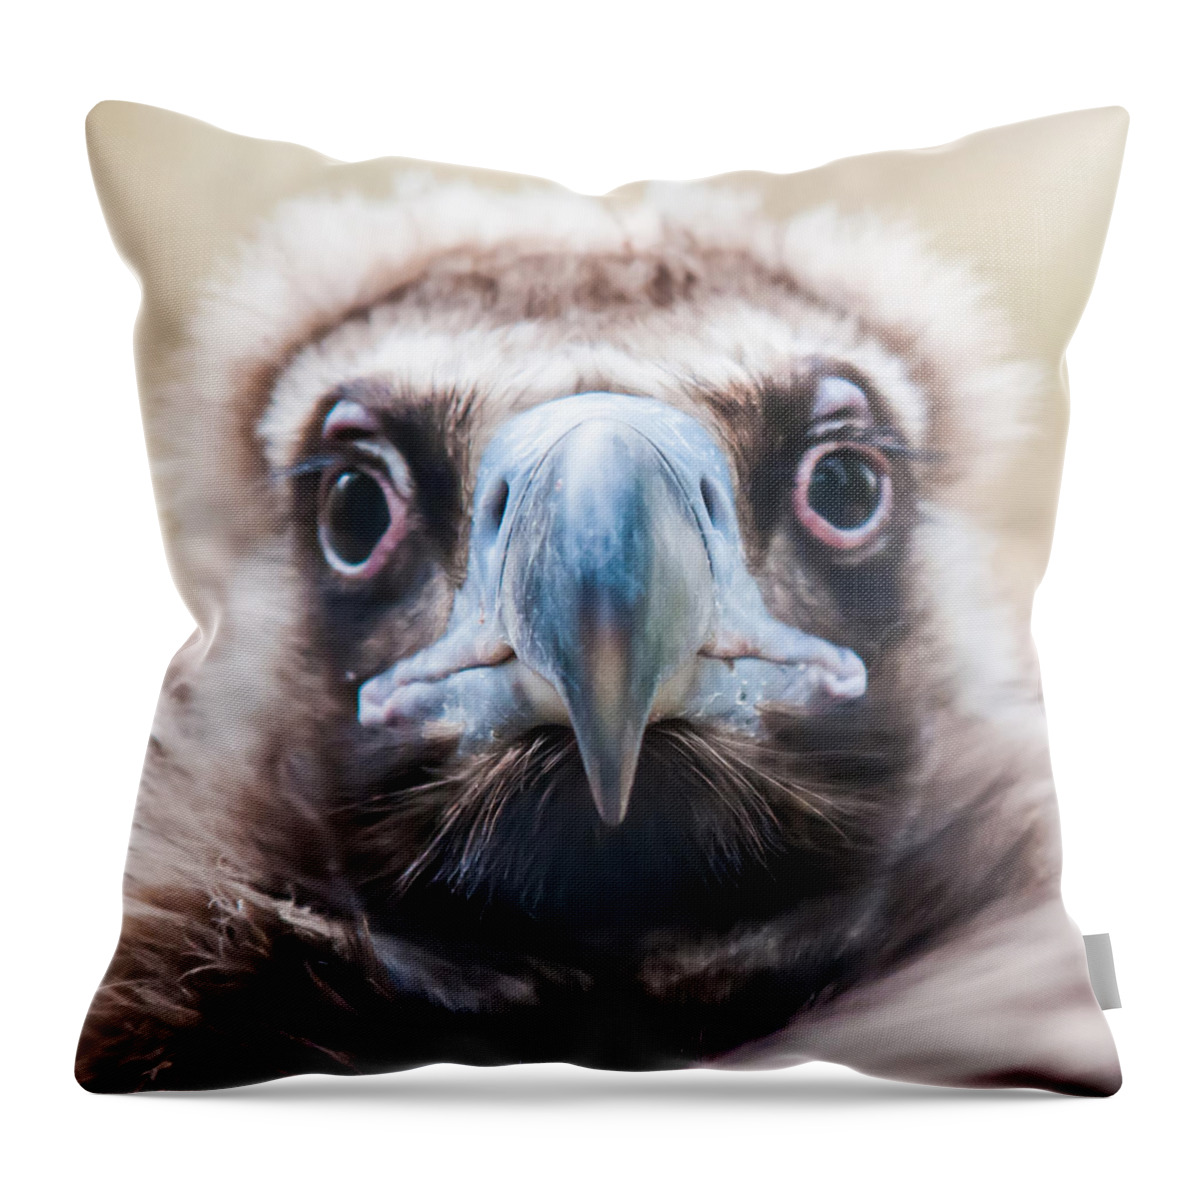 Young Throw Pillow featuring the photograph Young Baby Vulture Raptor Bird by Alex Grichenko